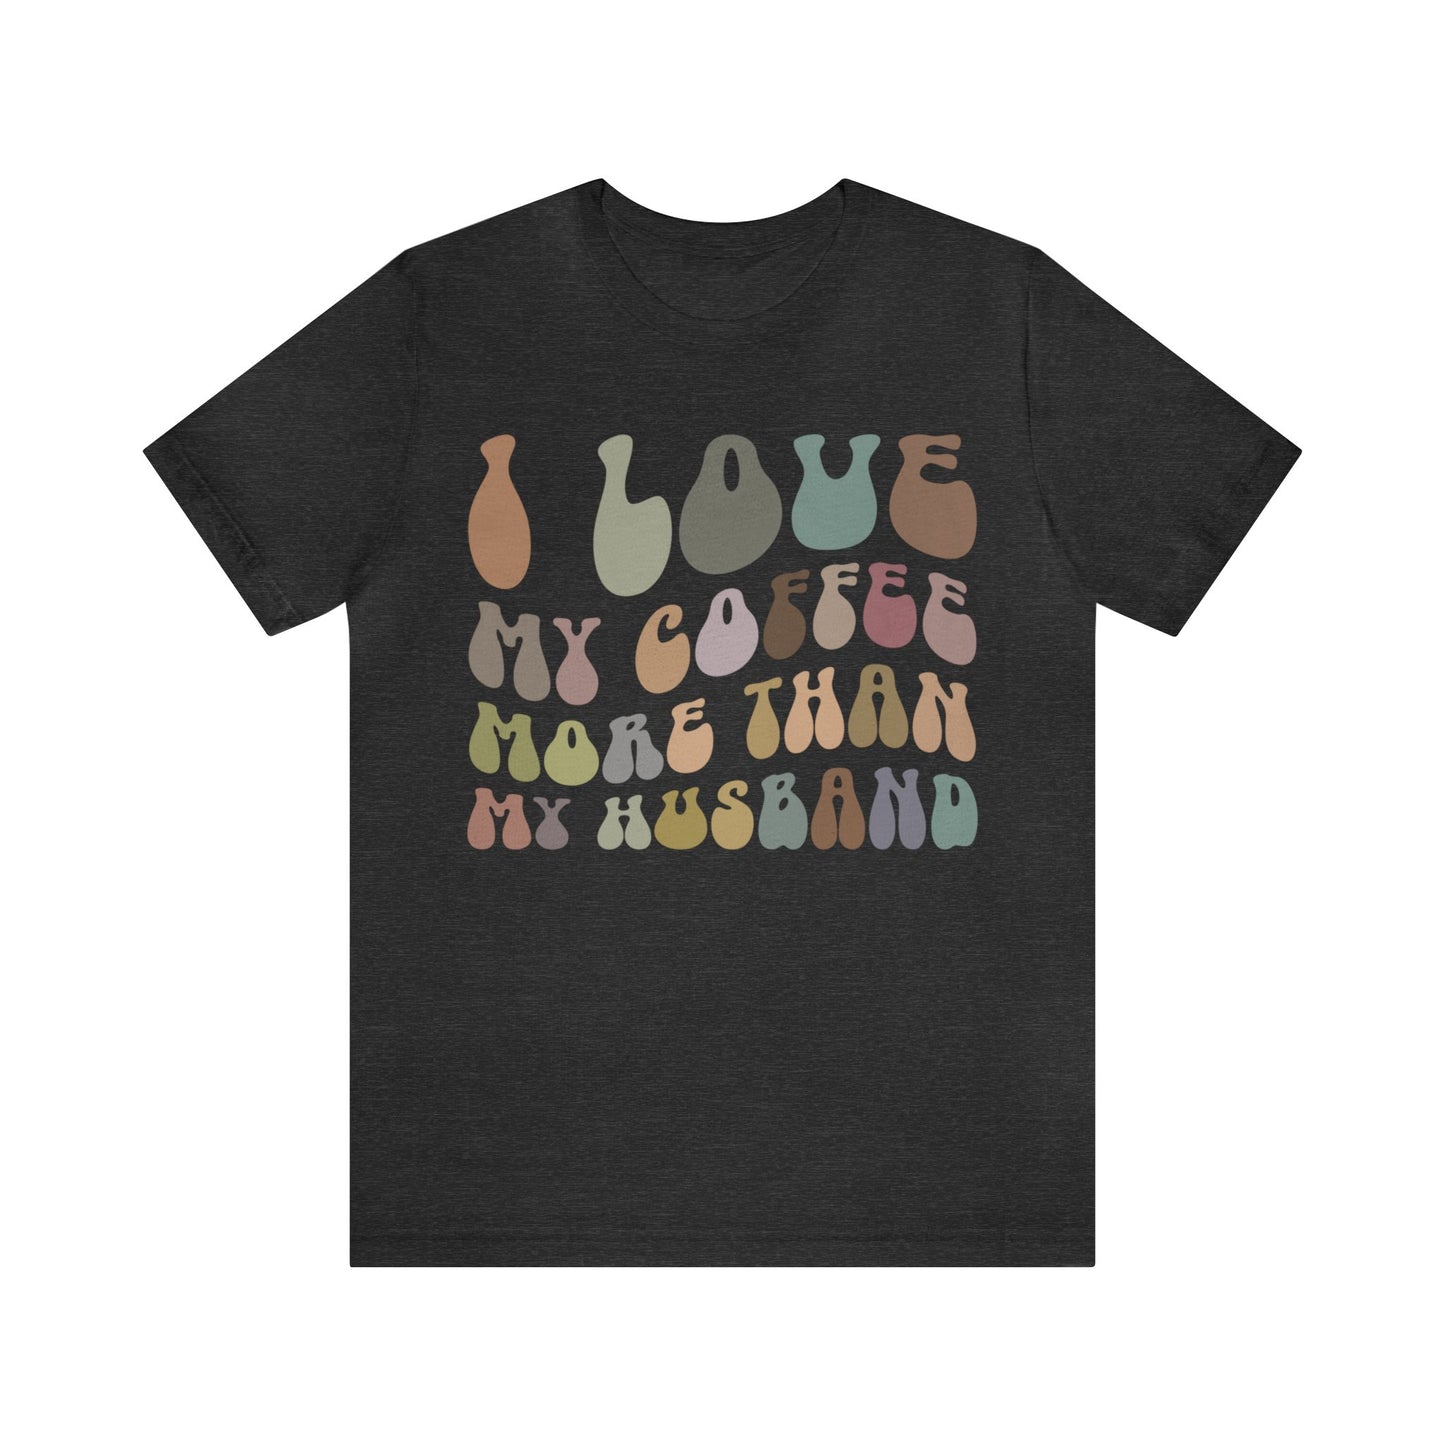 I Love My Coffee More Than My Husband Shirt, Funny Coffee Shirt, Husband Gift, Gift For Husband, Gift for lover Coffee, T1437